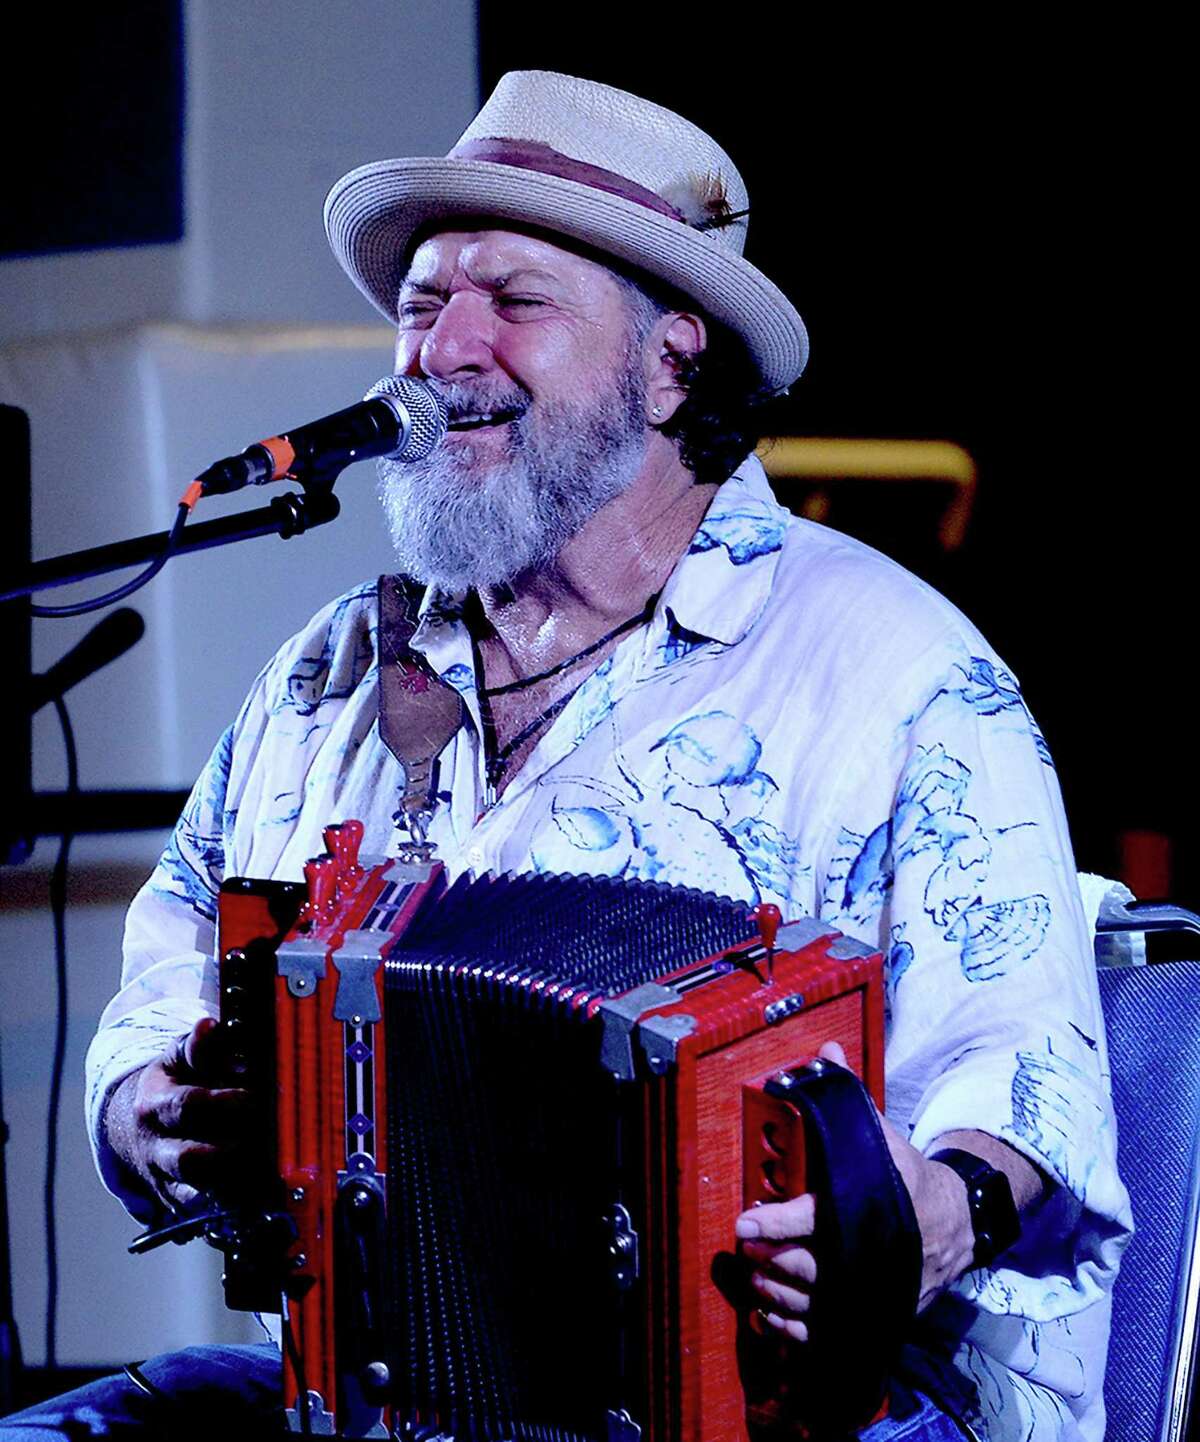 Wayne Toups performs on Friday night at on the Cajun Stage at the Conroe Cajun Catfish Festival.